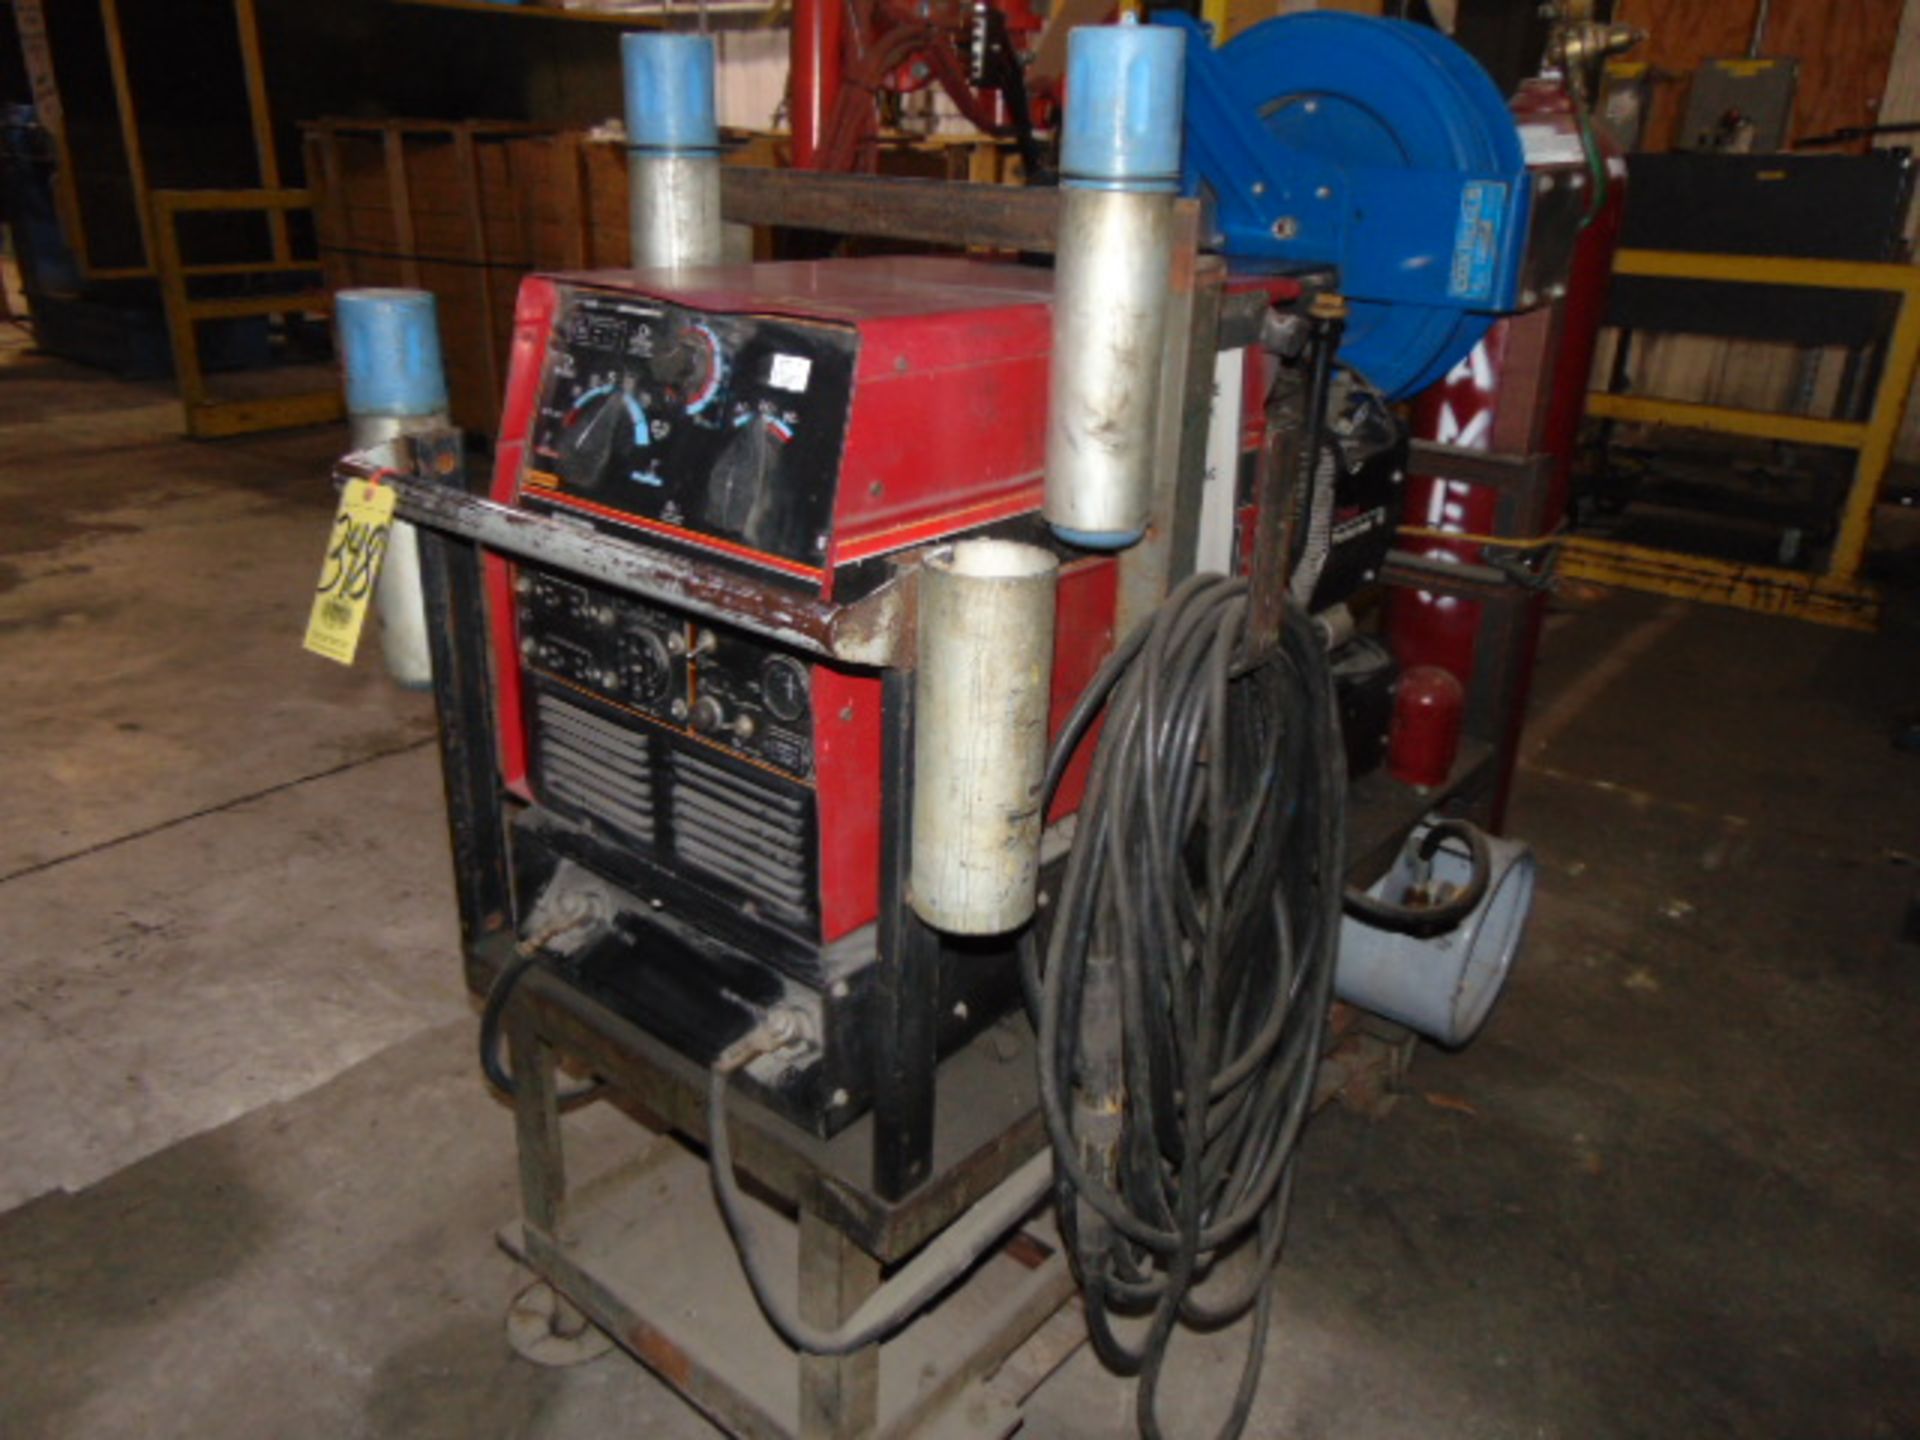 PORTABLE WELDING POWER SOURCE/GENERATOR, LINCOLN MDL. RANGER 8LPG, 200 amps AC & 180 amps DC output, - Image 2 of 6